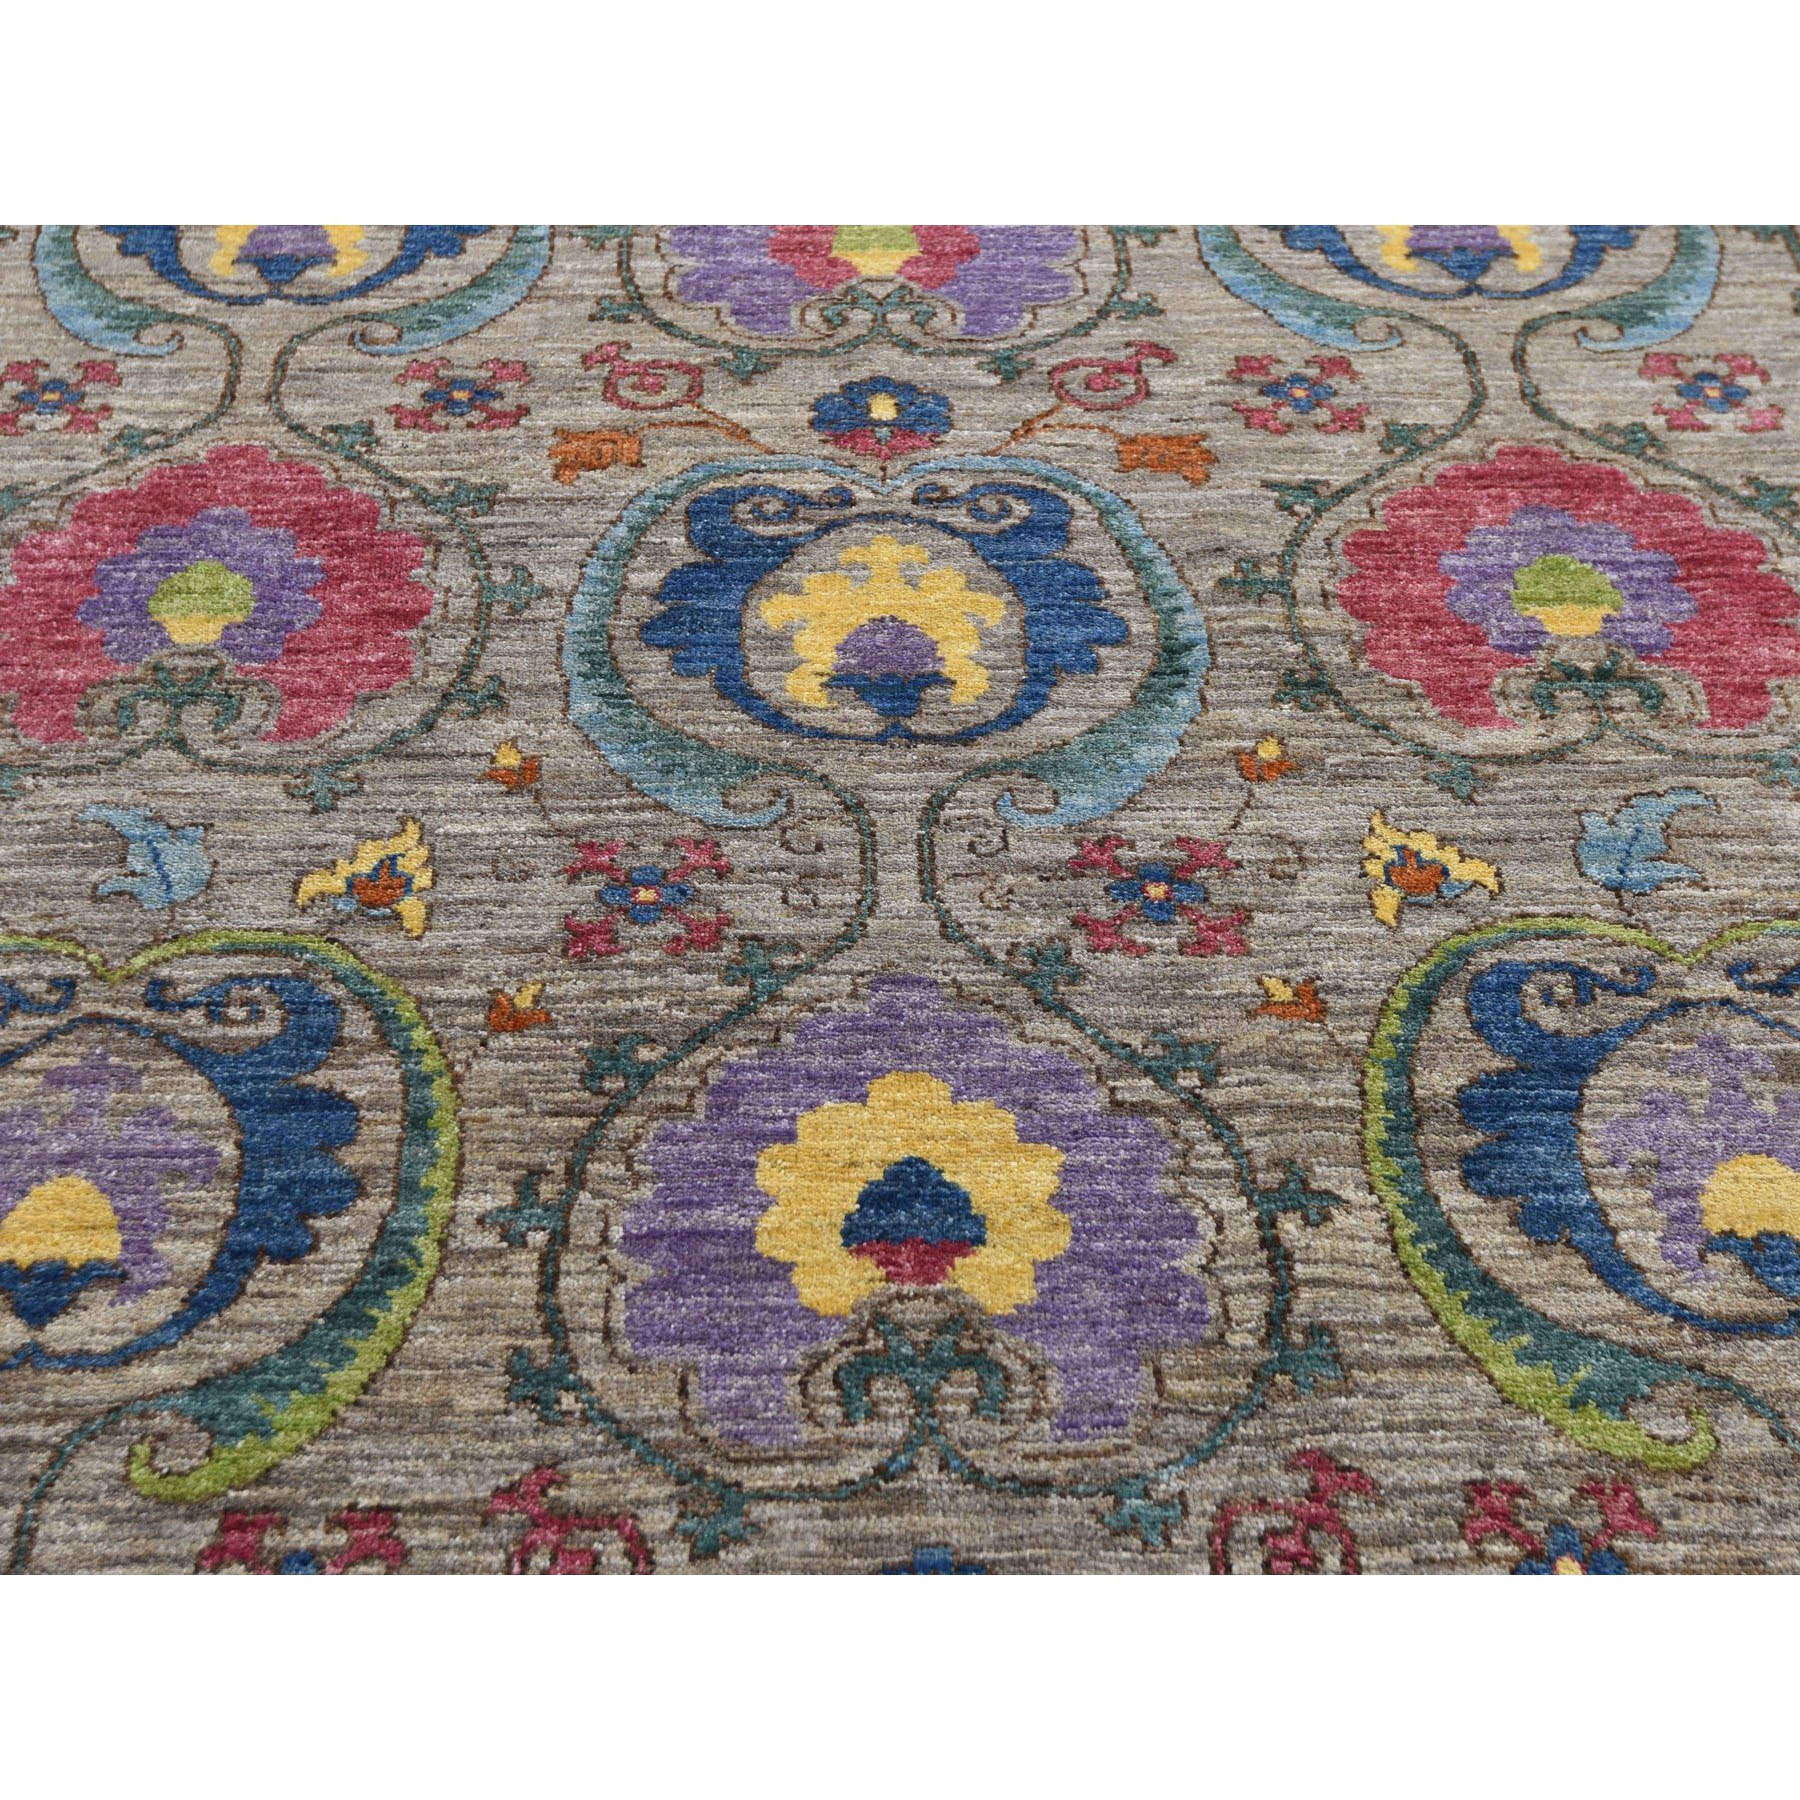 8-1 x10- Colorful Hand Knotted Peshawar Arts and Crafts Design Oriental Rug 